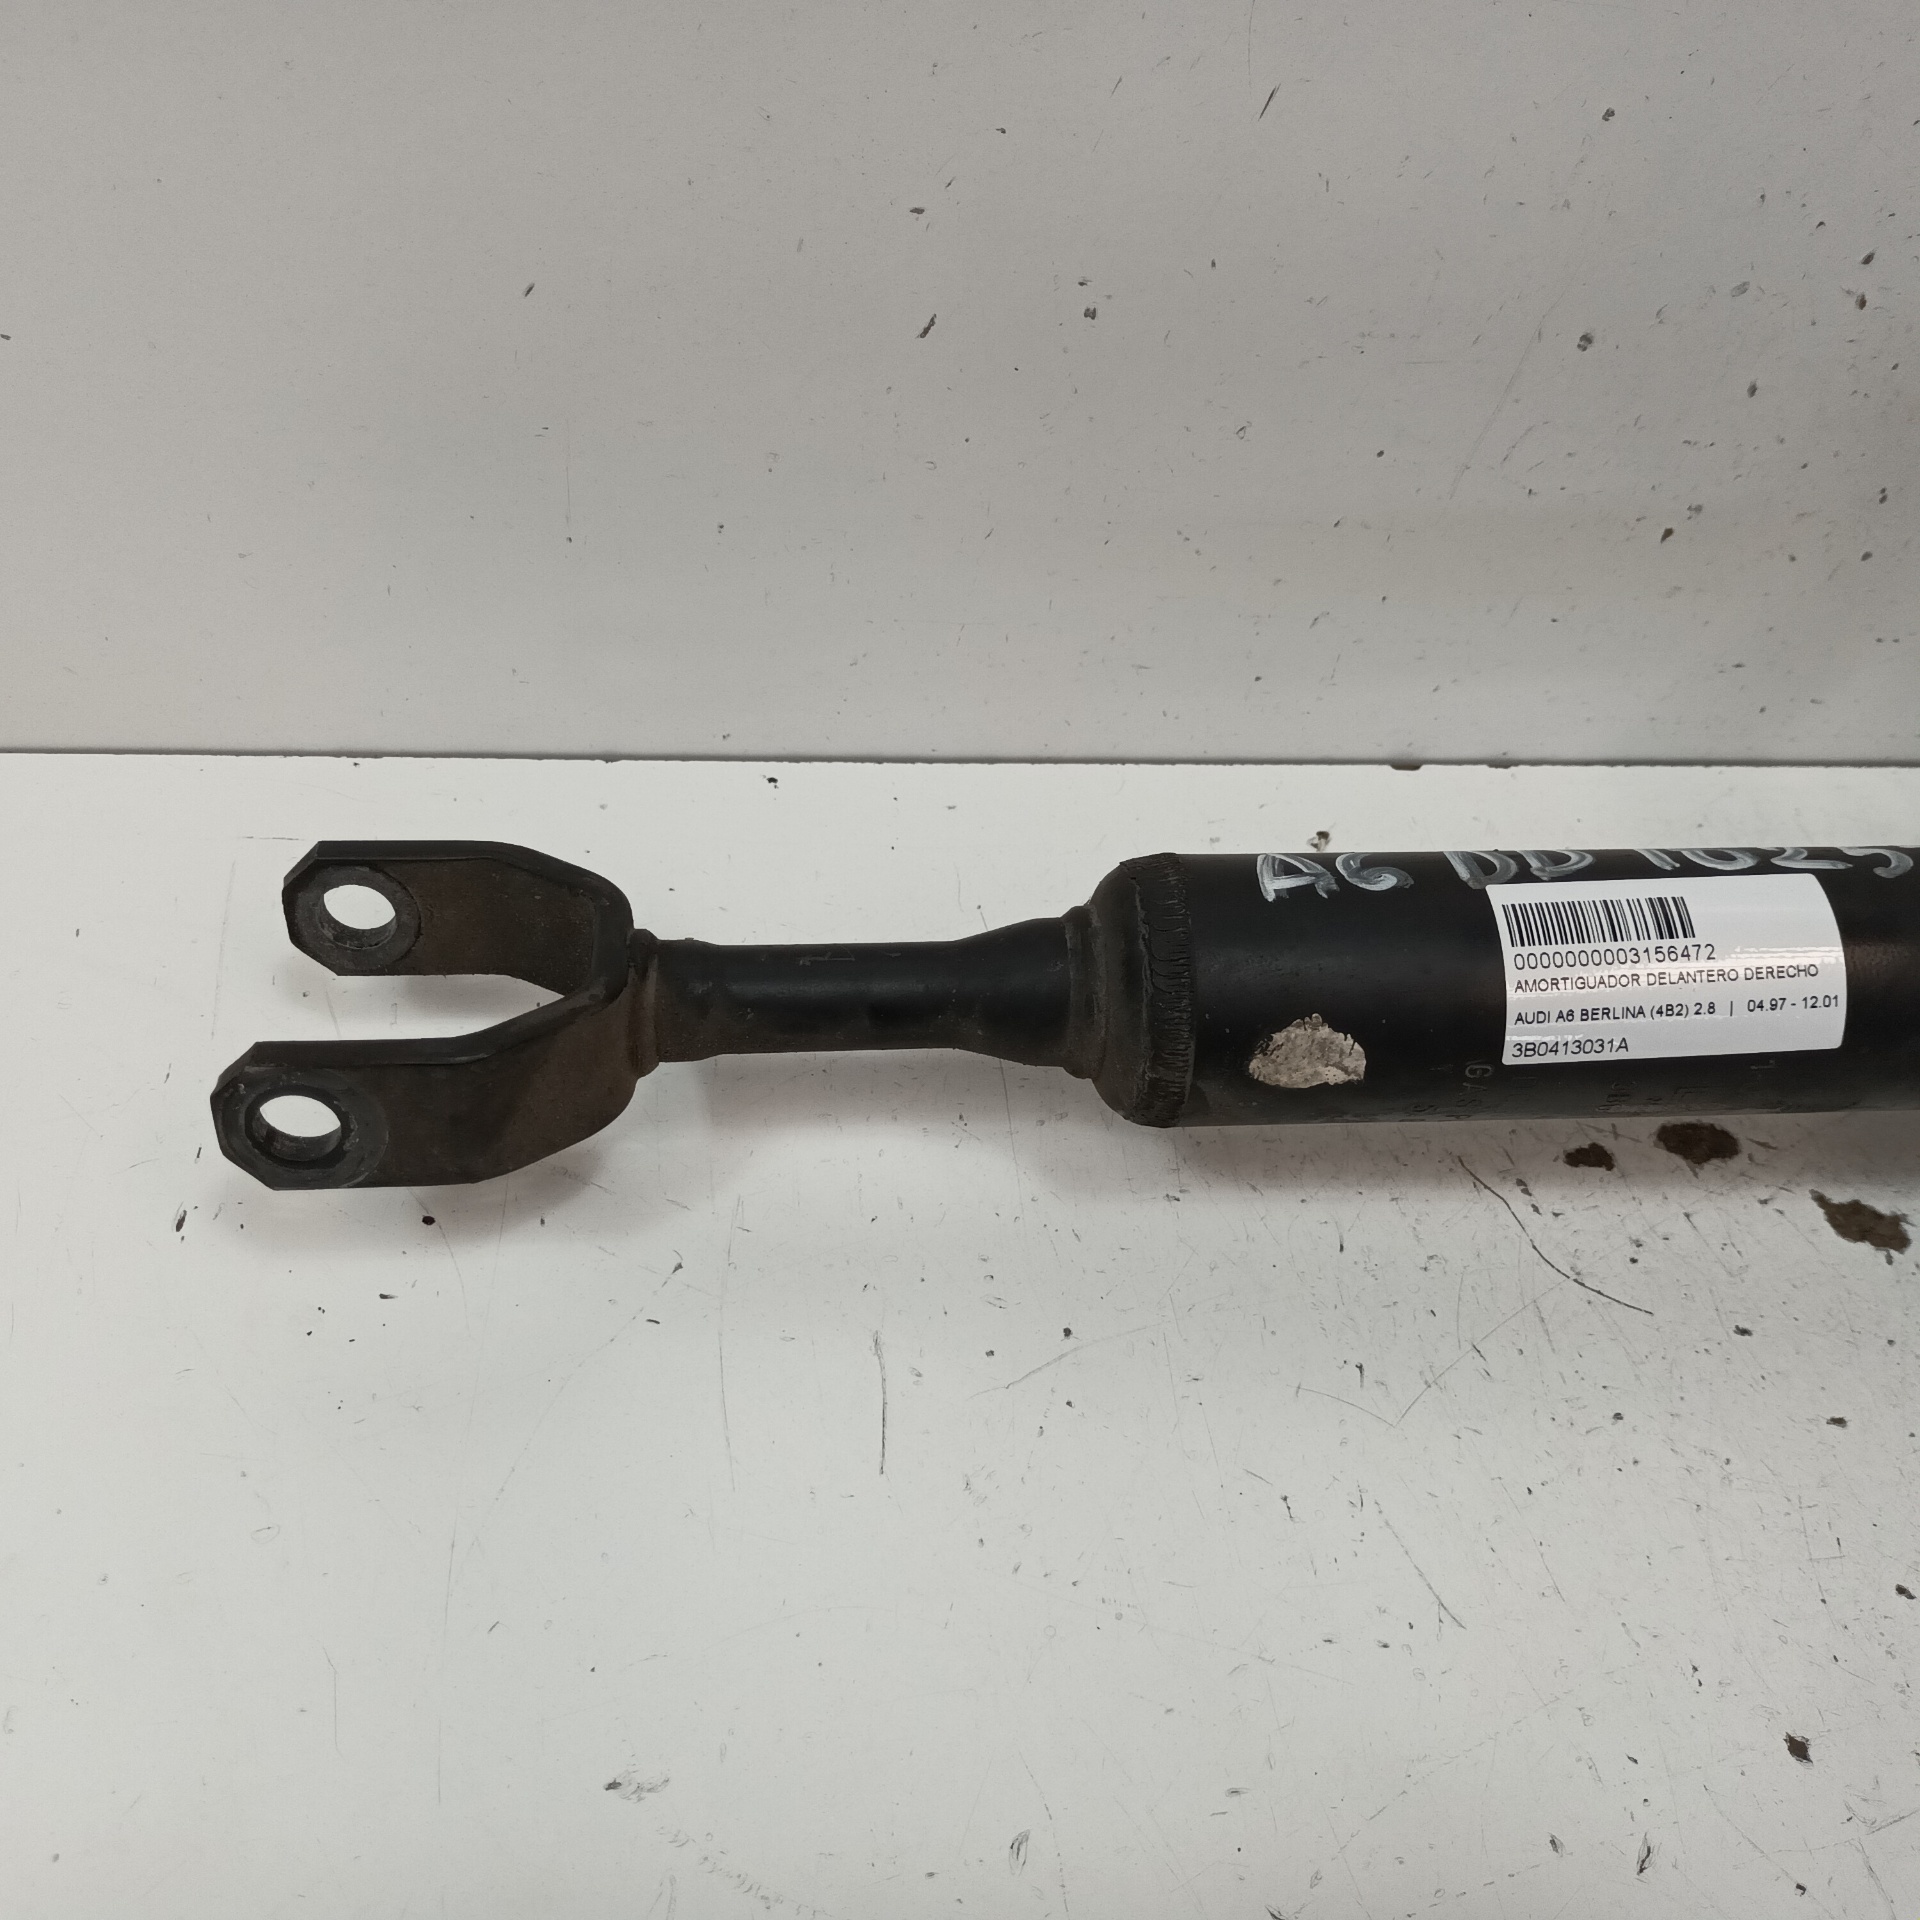 AUDI A3 8L (1996-2003) Front Right Shock Absorber 3B0413031A 22353340